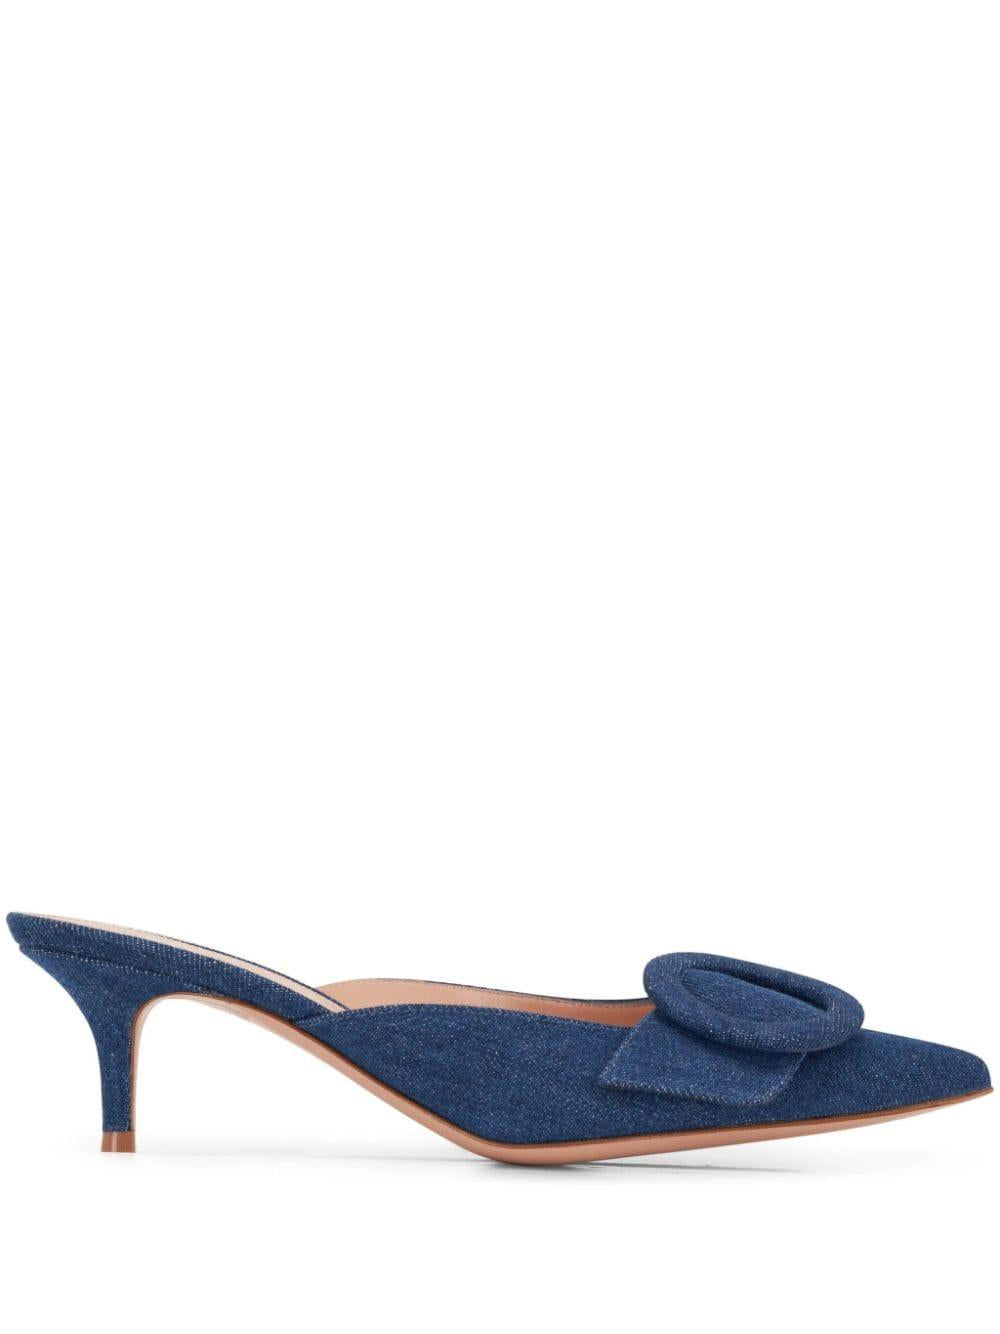 GIANVITO ROSSI Must-Have Denim Flats for the SS24 Season